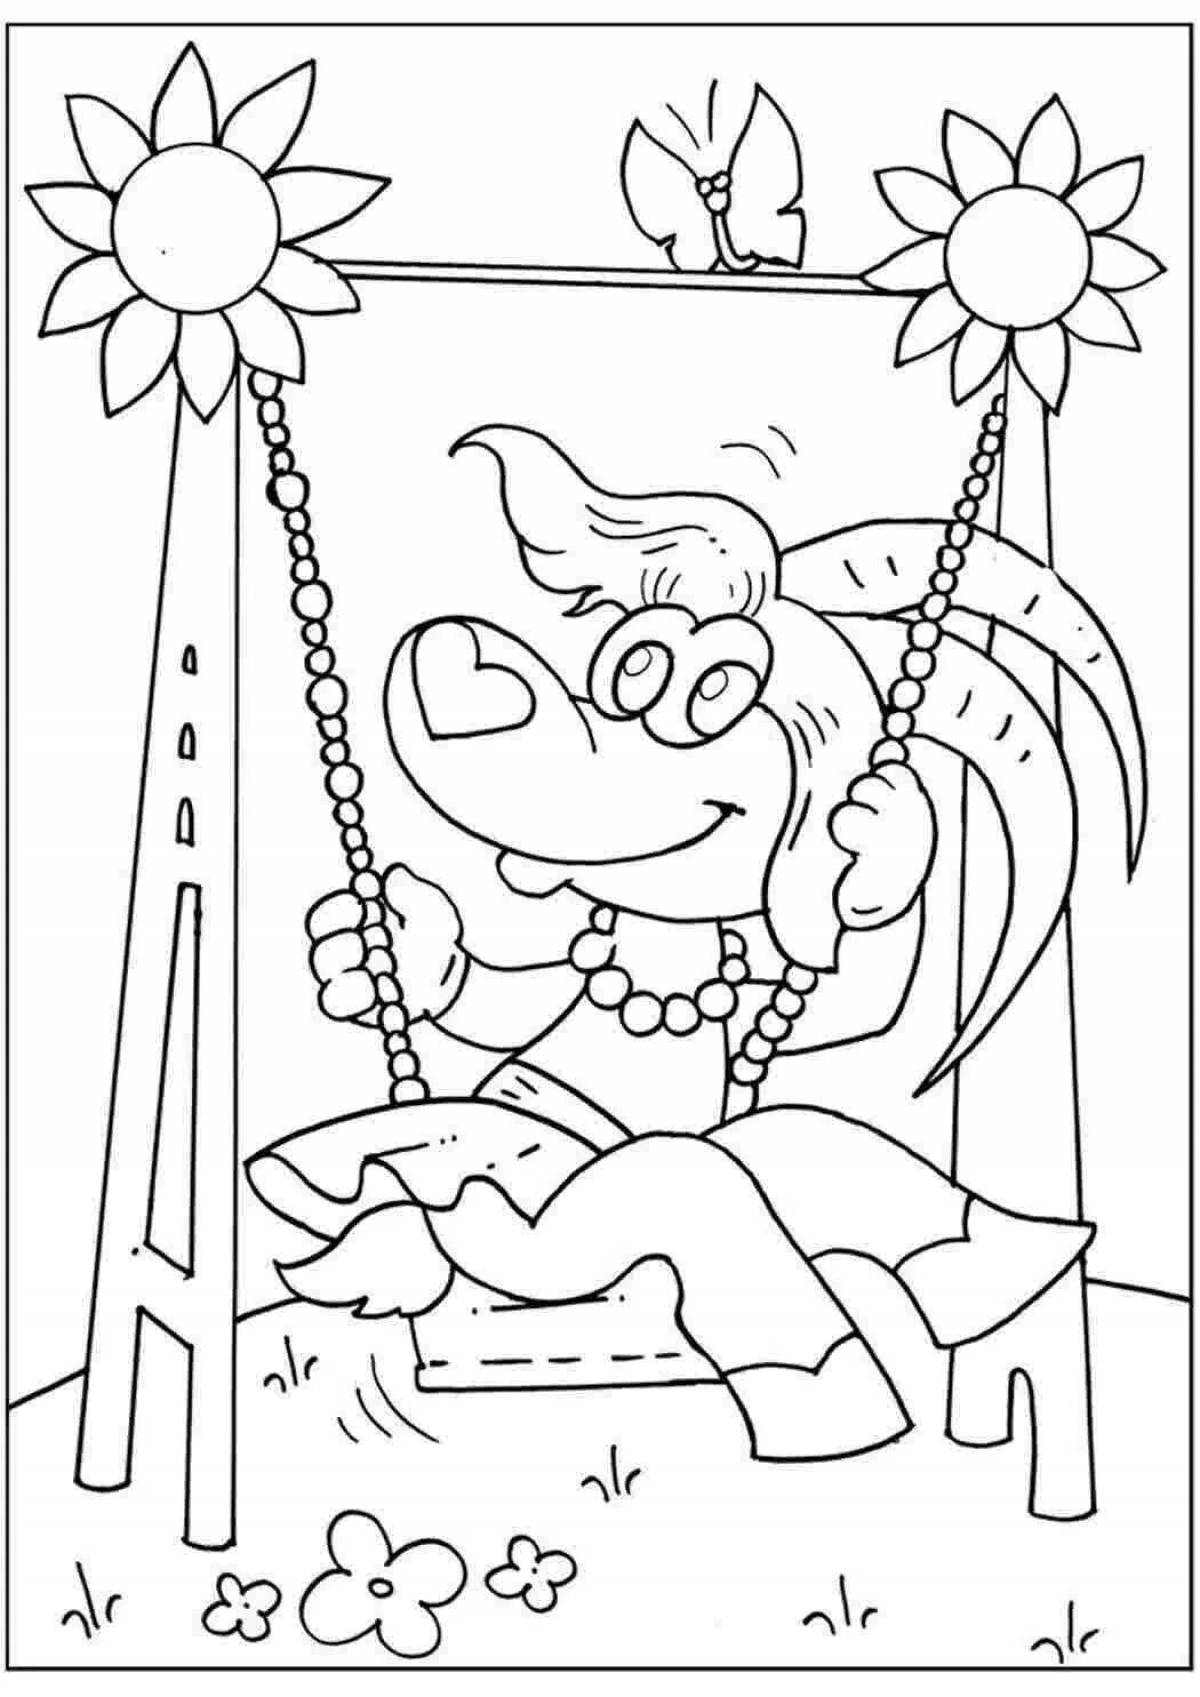 Colorful dereza goat coloring page